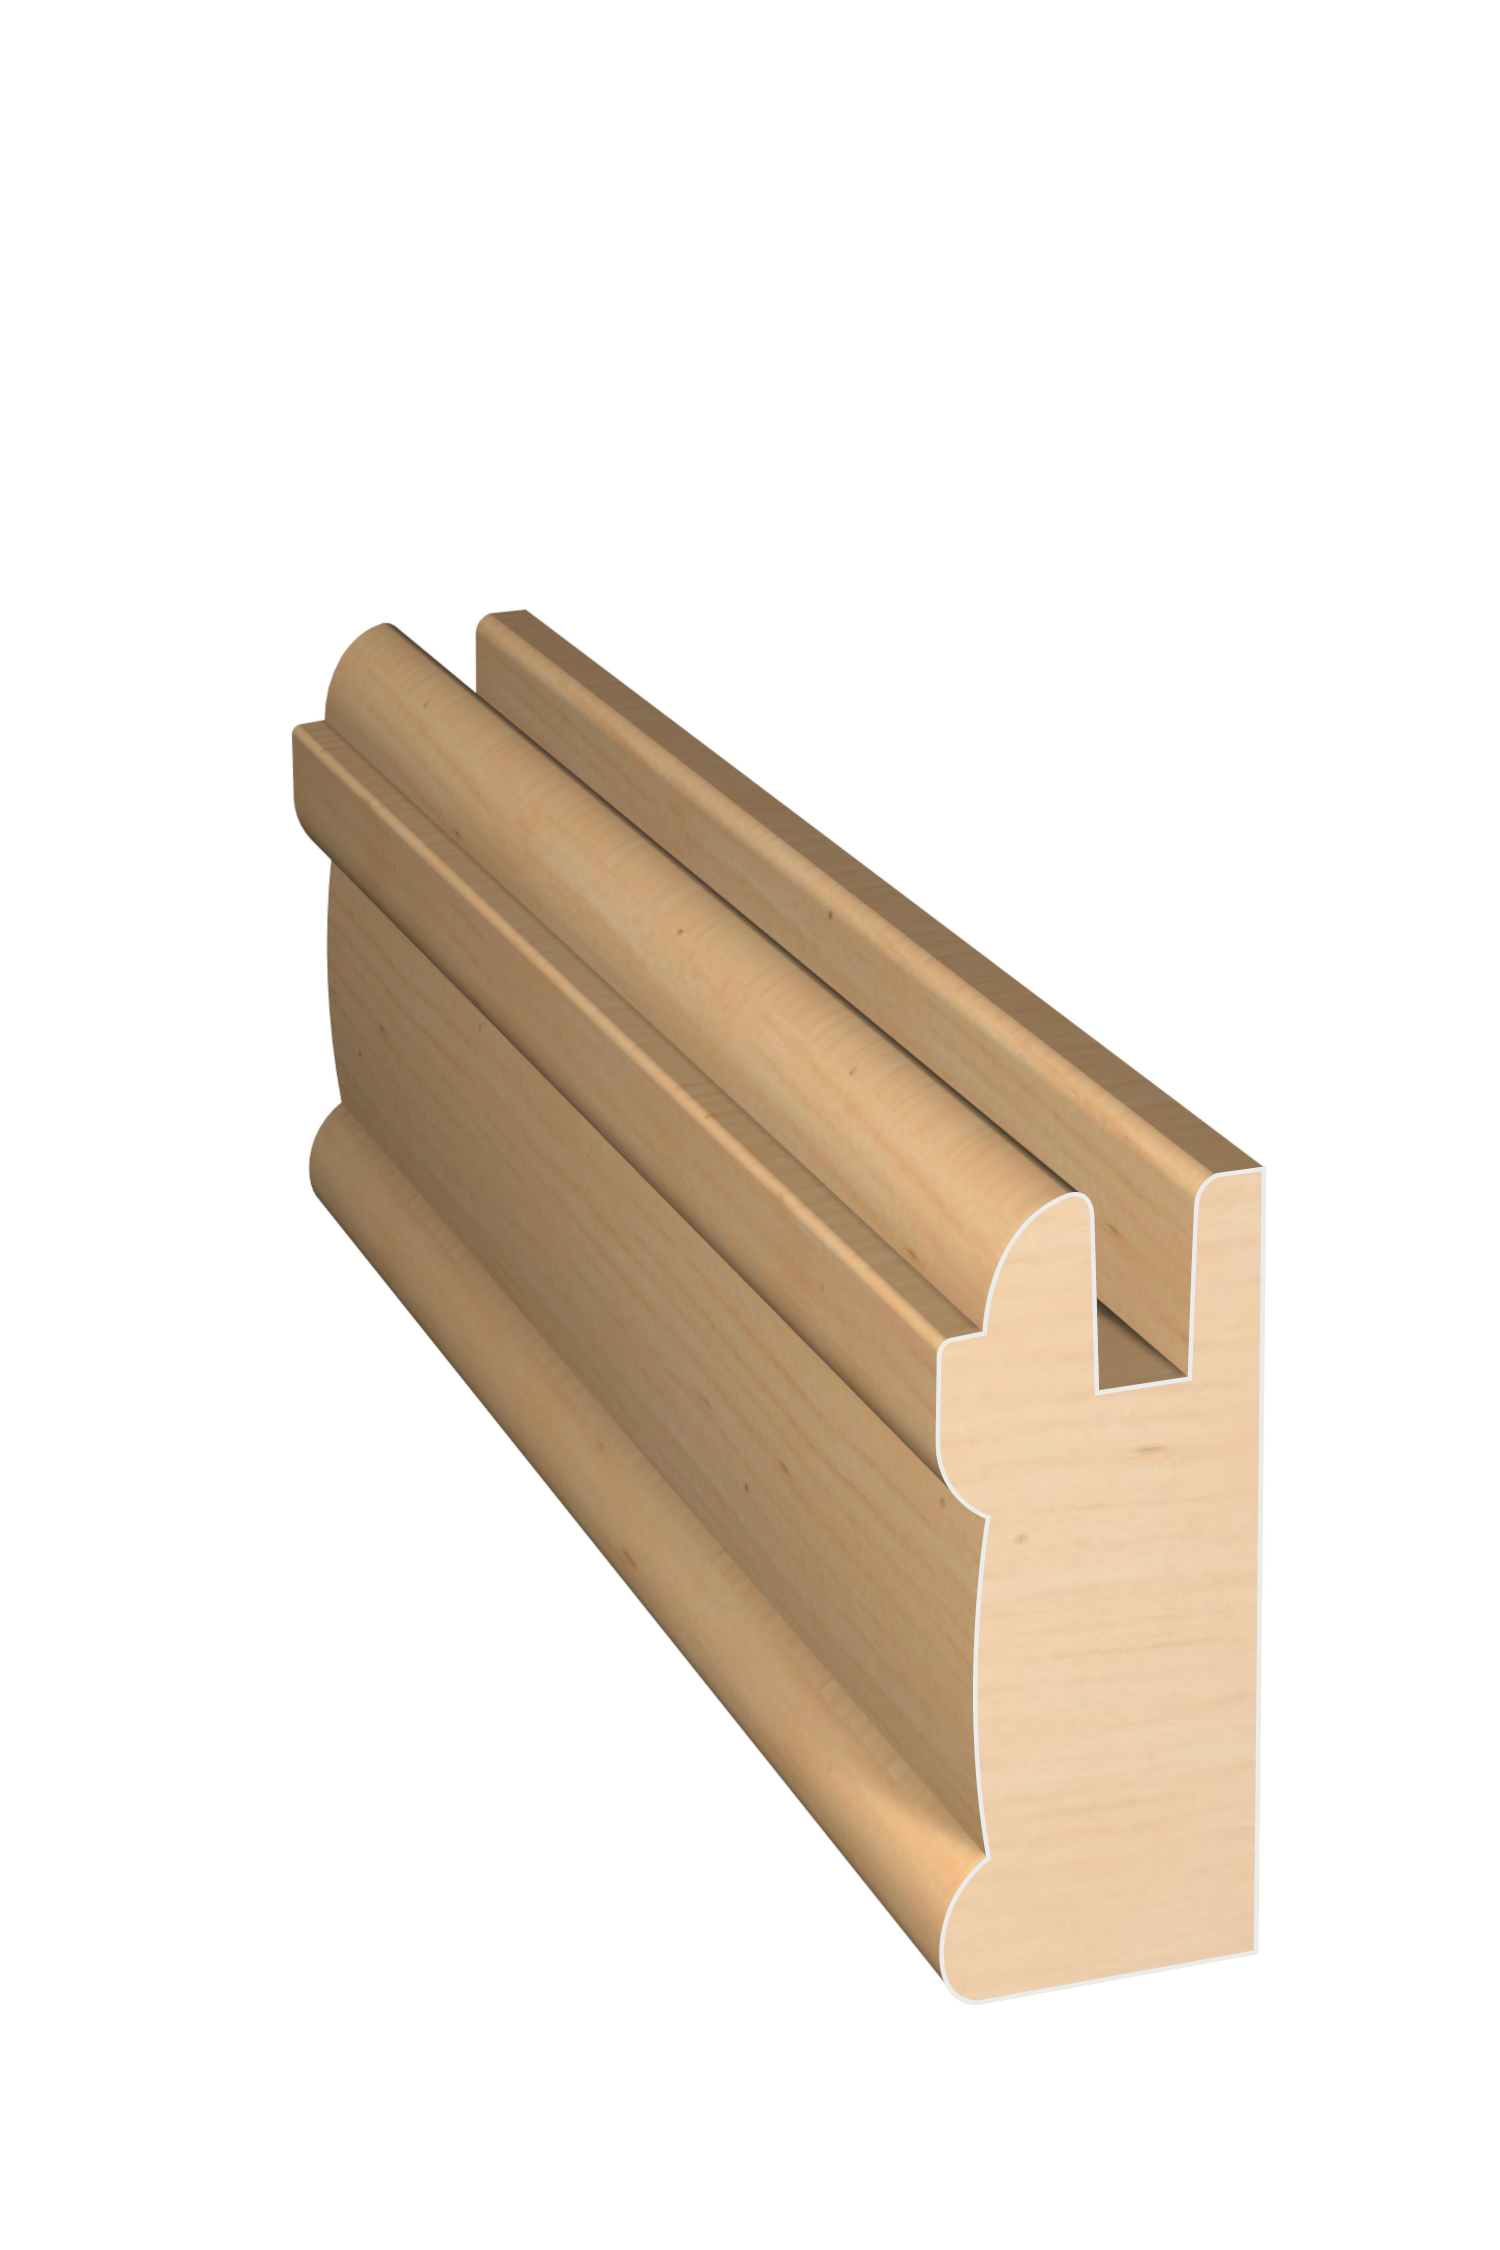 Three dimensional rendering of custom cabinet rail wood molding CABPL21 made by Public Lumber Company in Detroit.